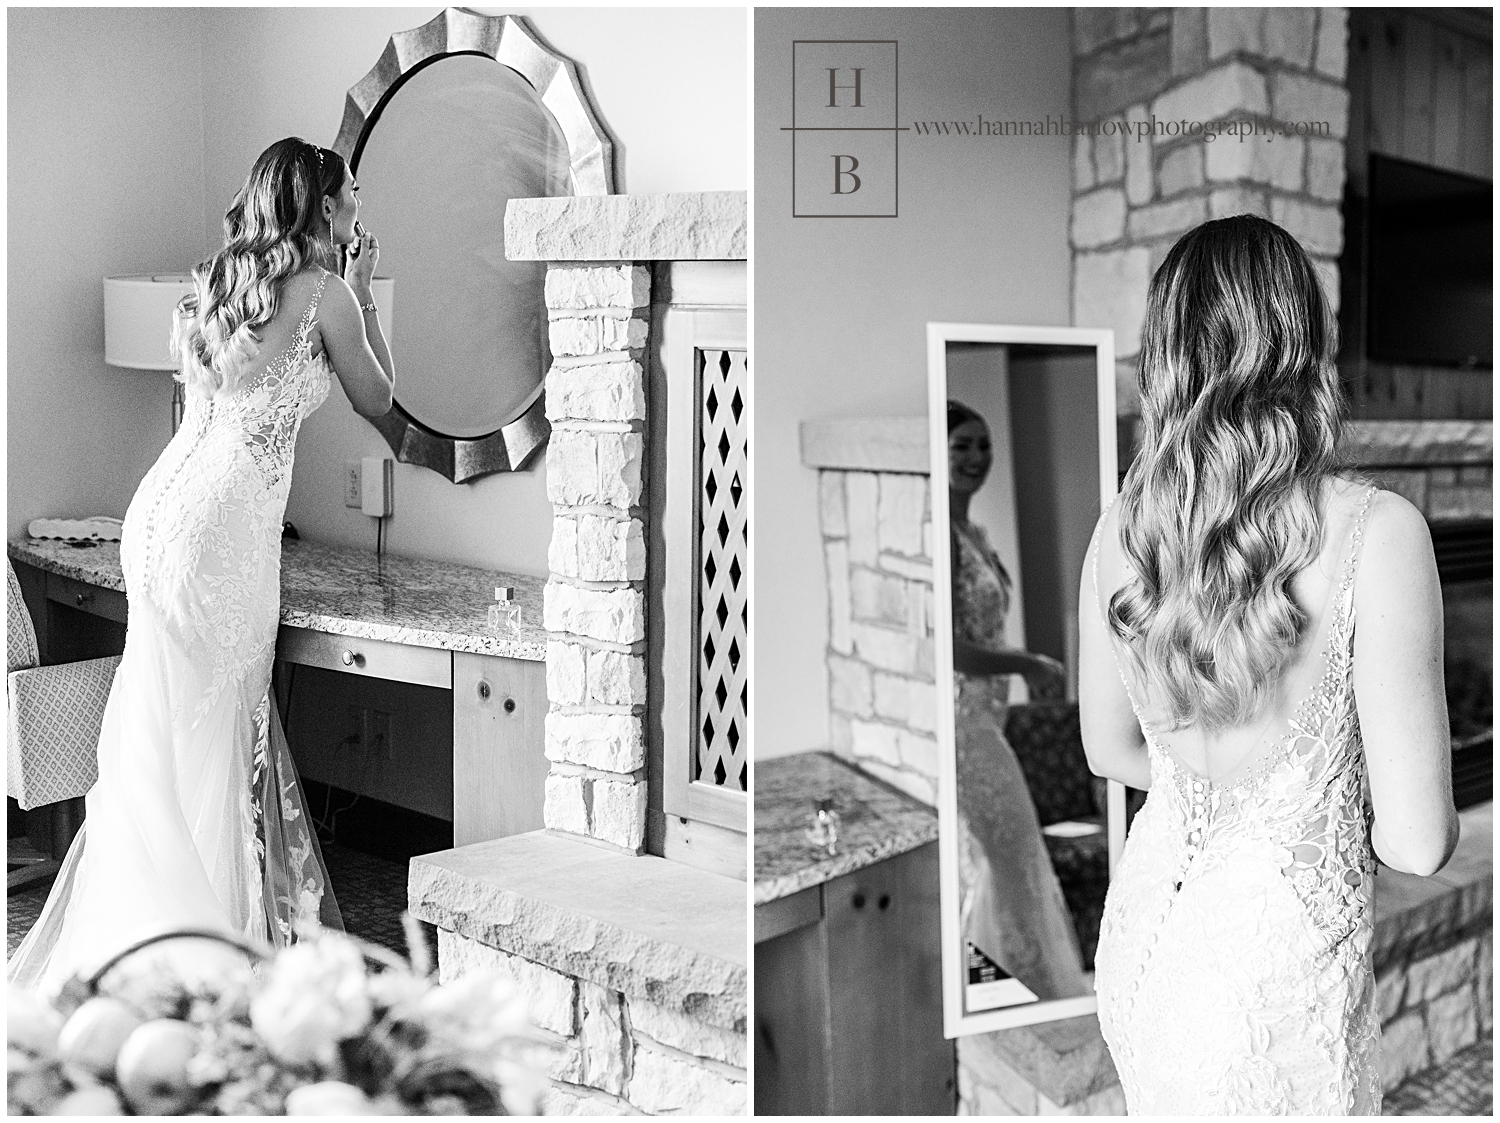 Black and white photos of bride looking at herself in mirror an applying lipstick.